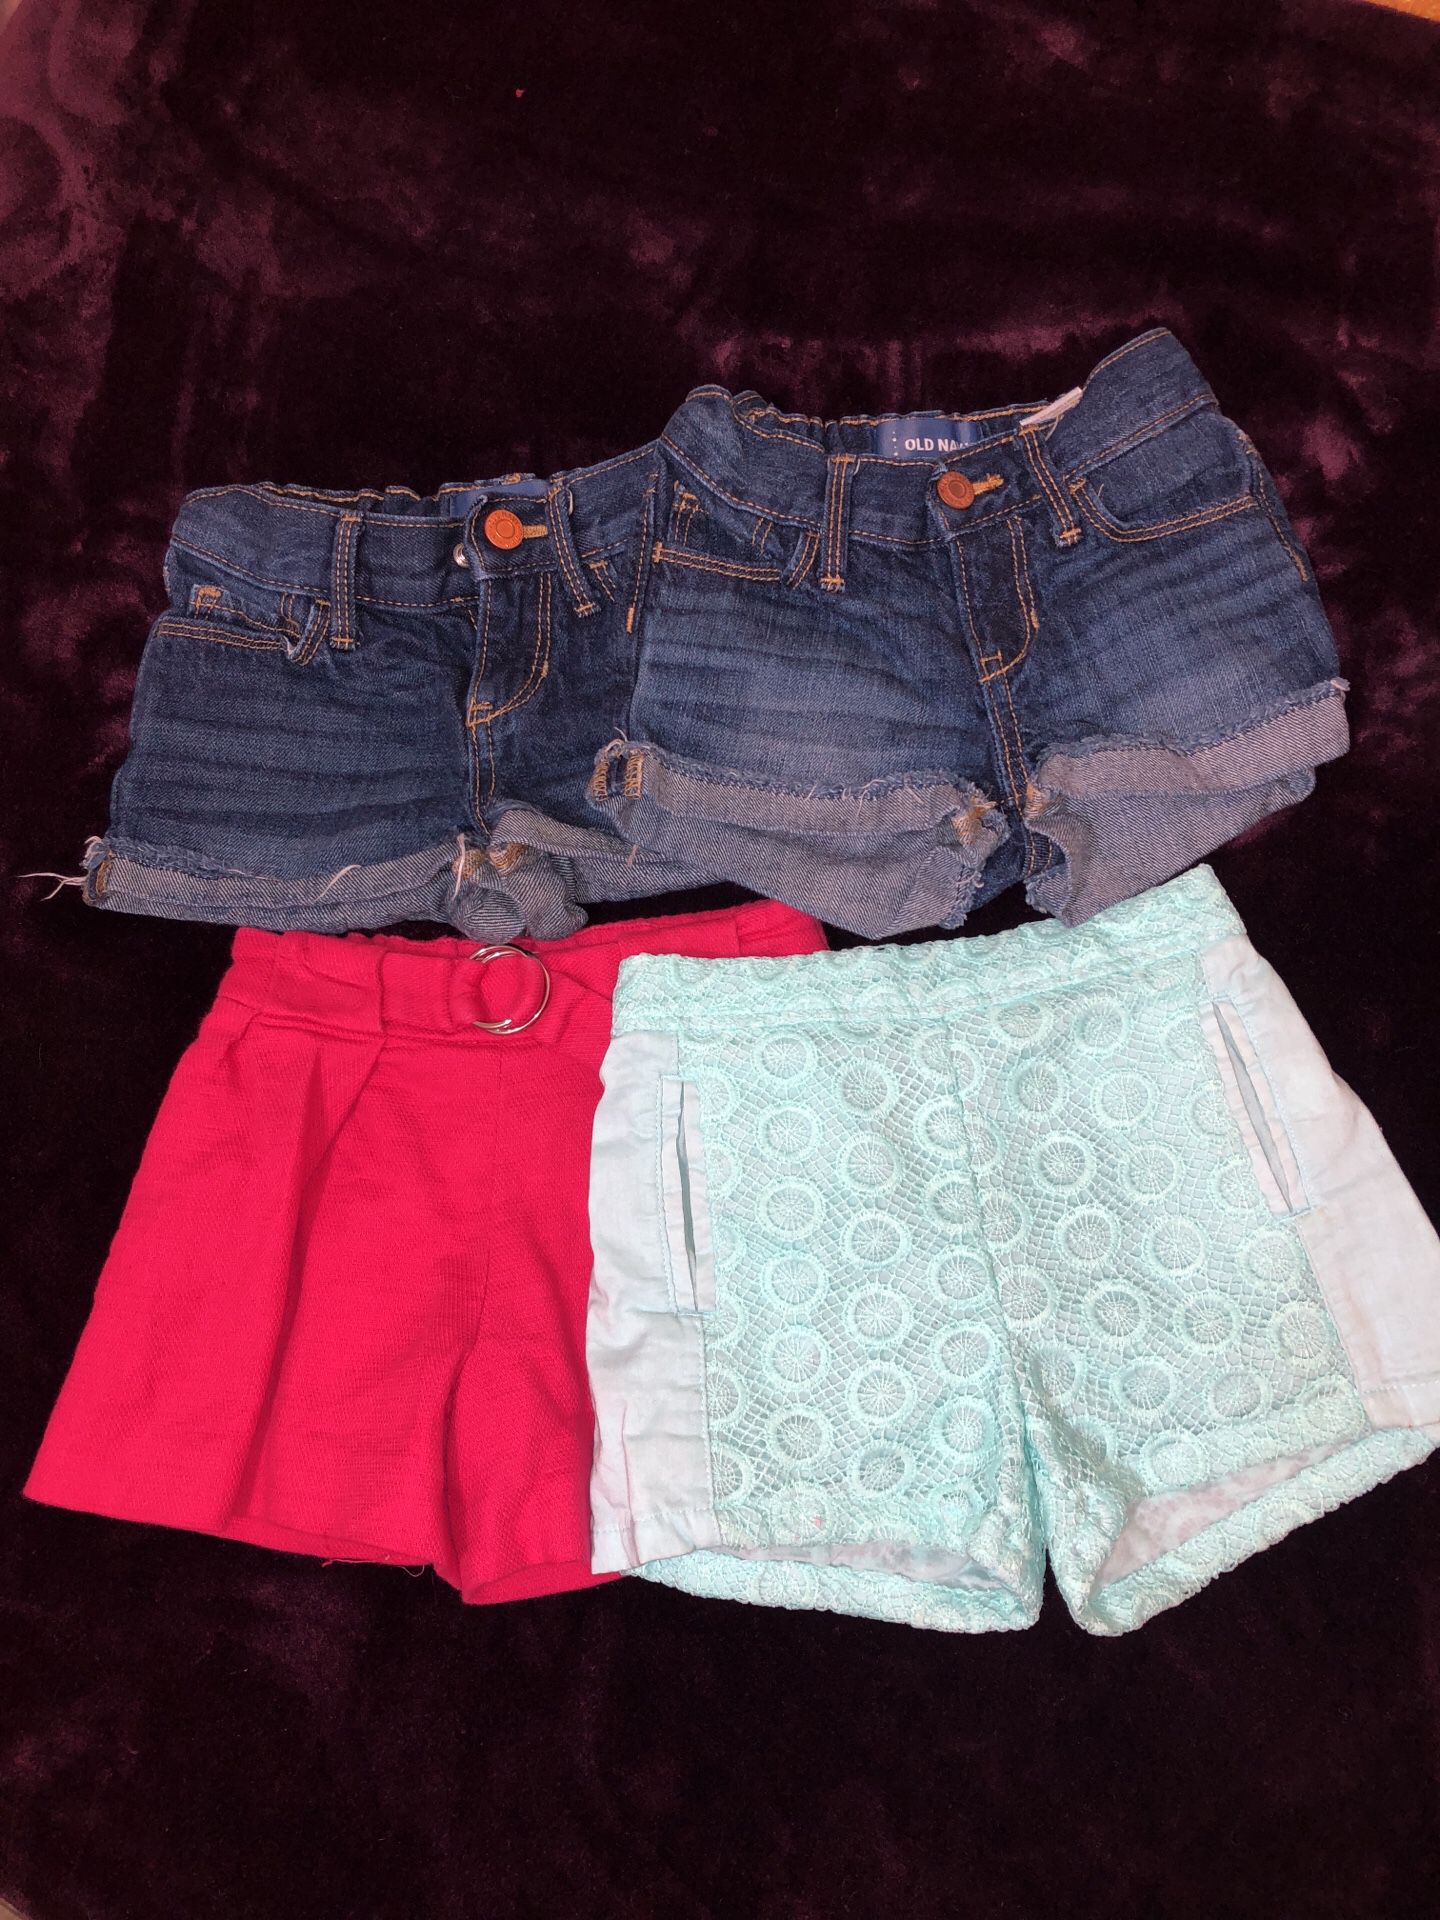 Shorts 4t and 5T